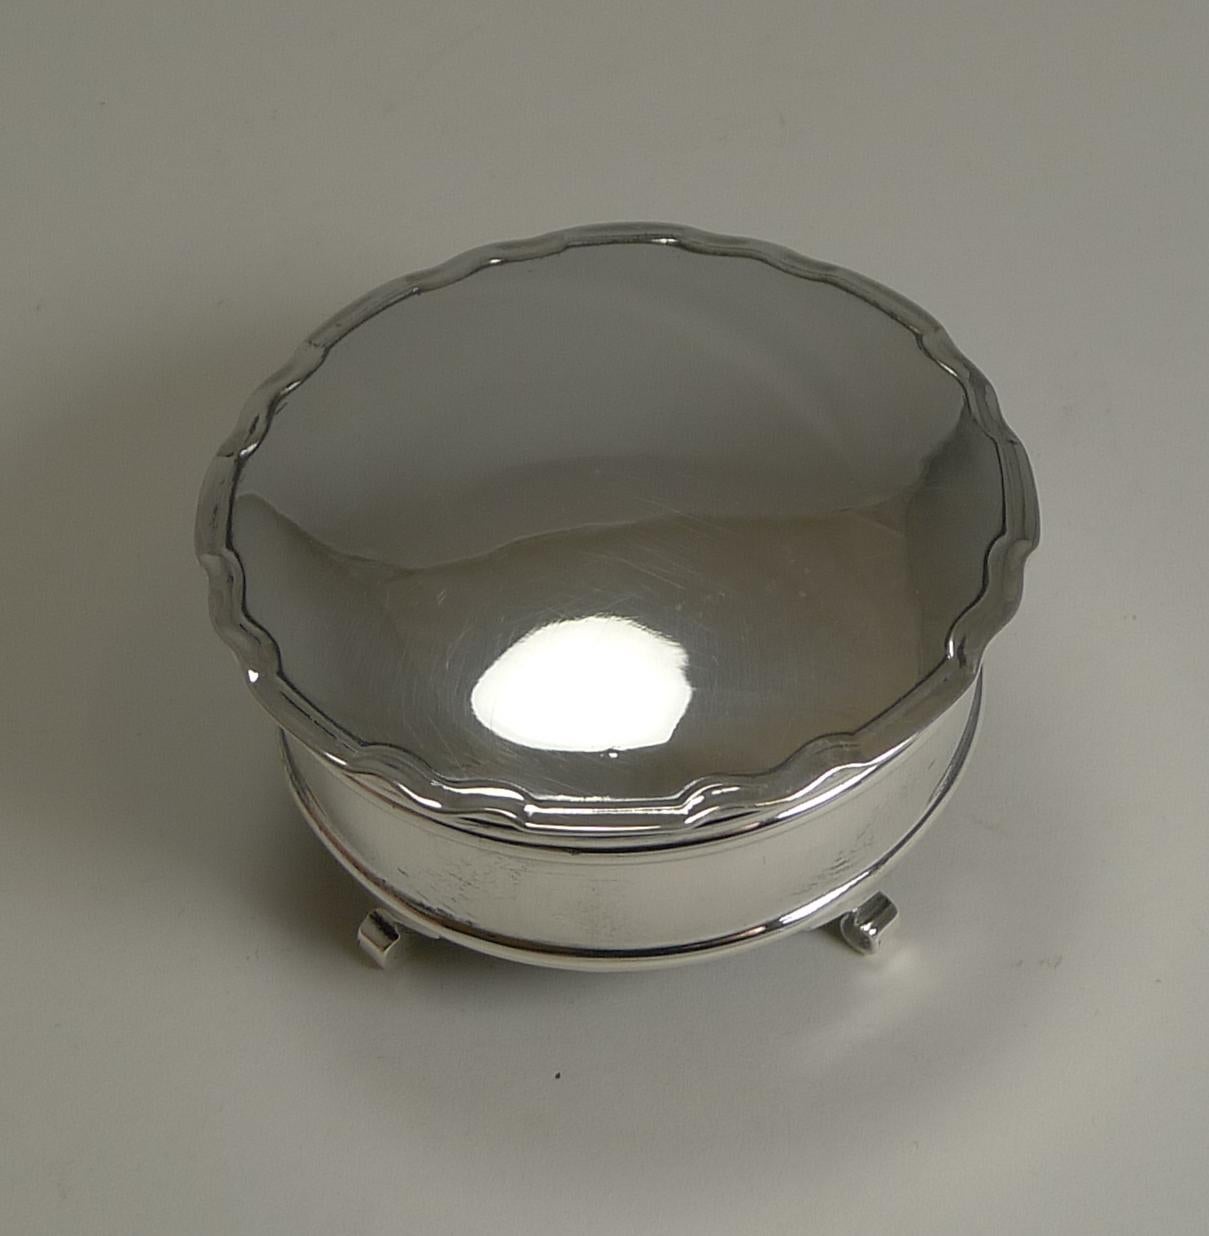 A very elegant jewellery or ring box made from English sterling silver fully hallmarked for Birmingham 1920, 98 years old. A good solid box on four handsome feet, the shaped lid with a raised border framing the slightly domed lid.

The lid fits